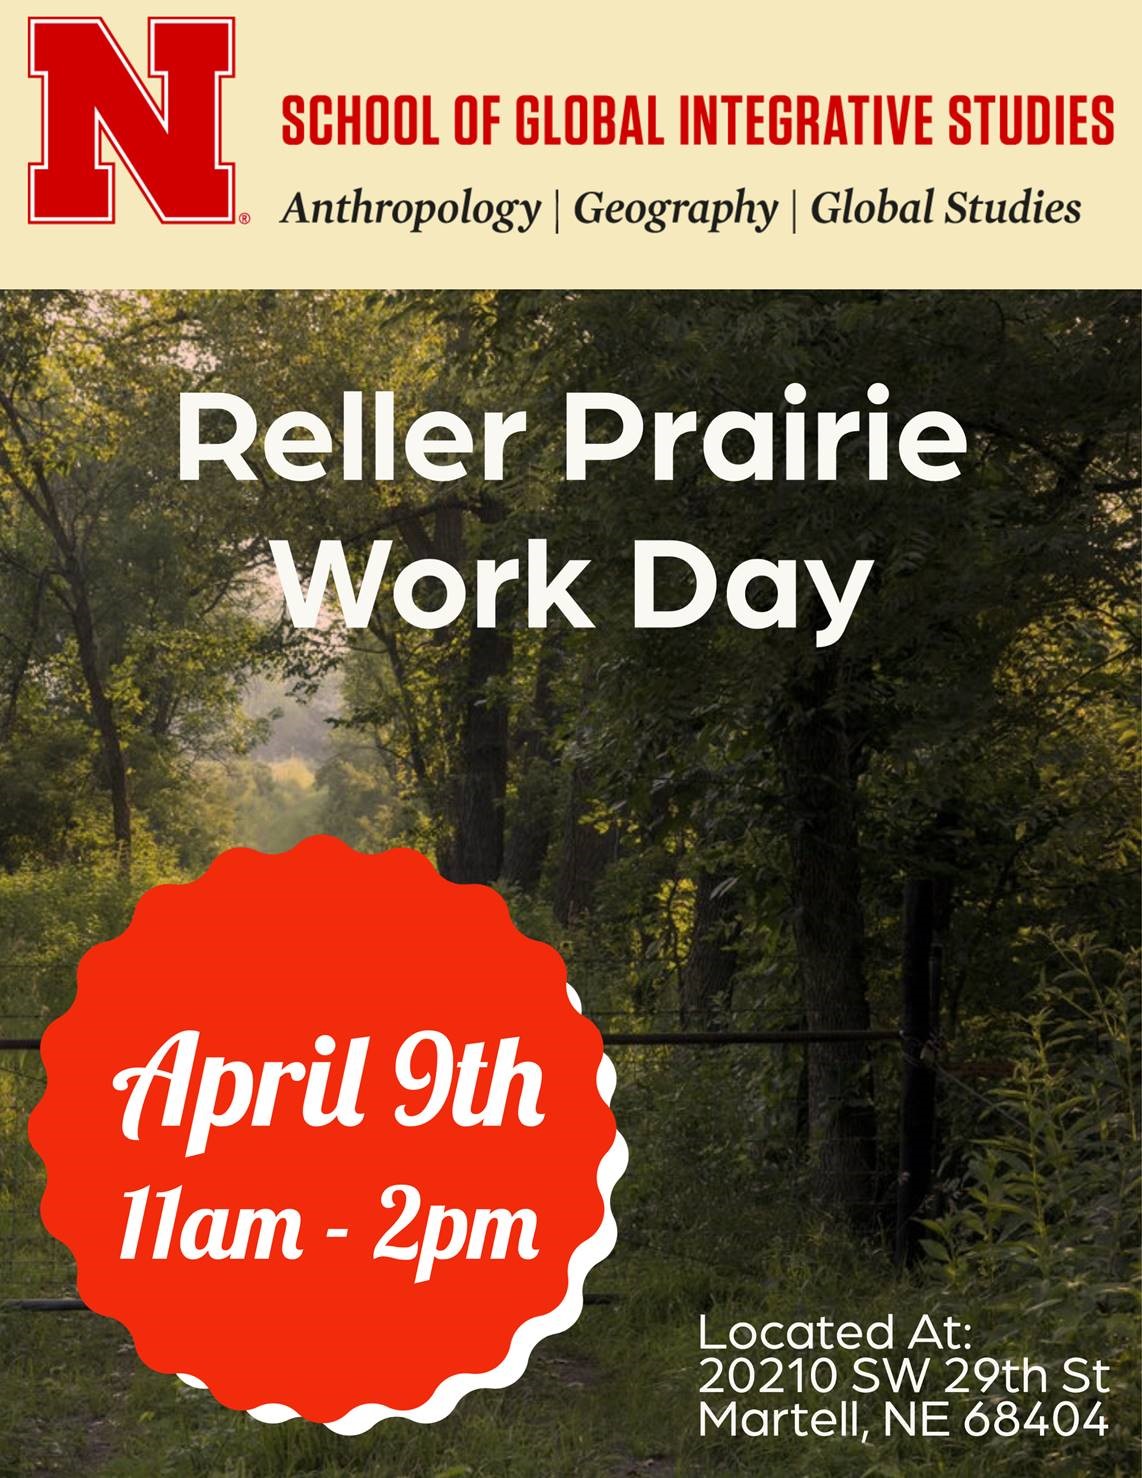 Join us for a Reller Prairie Work Day this Saturday!